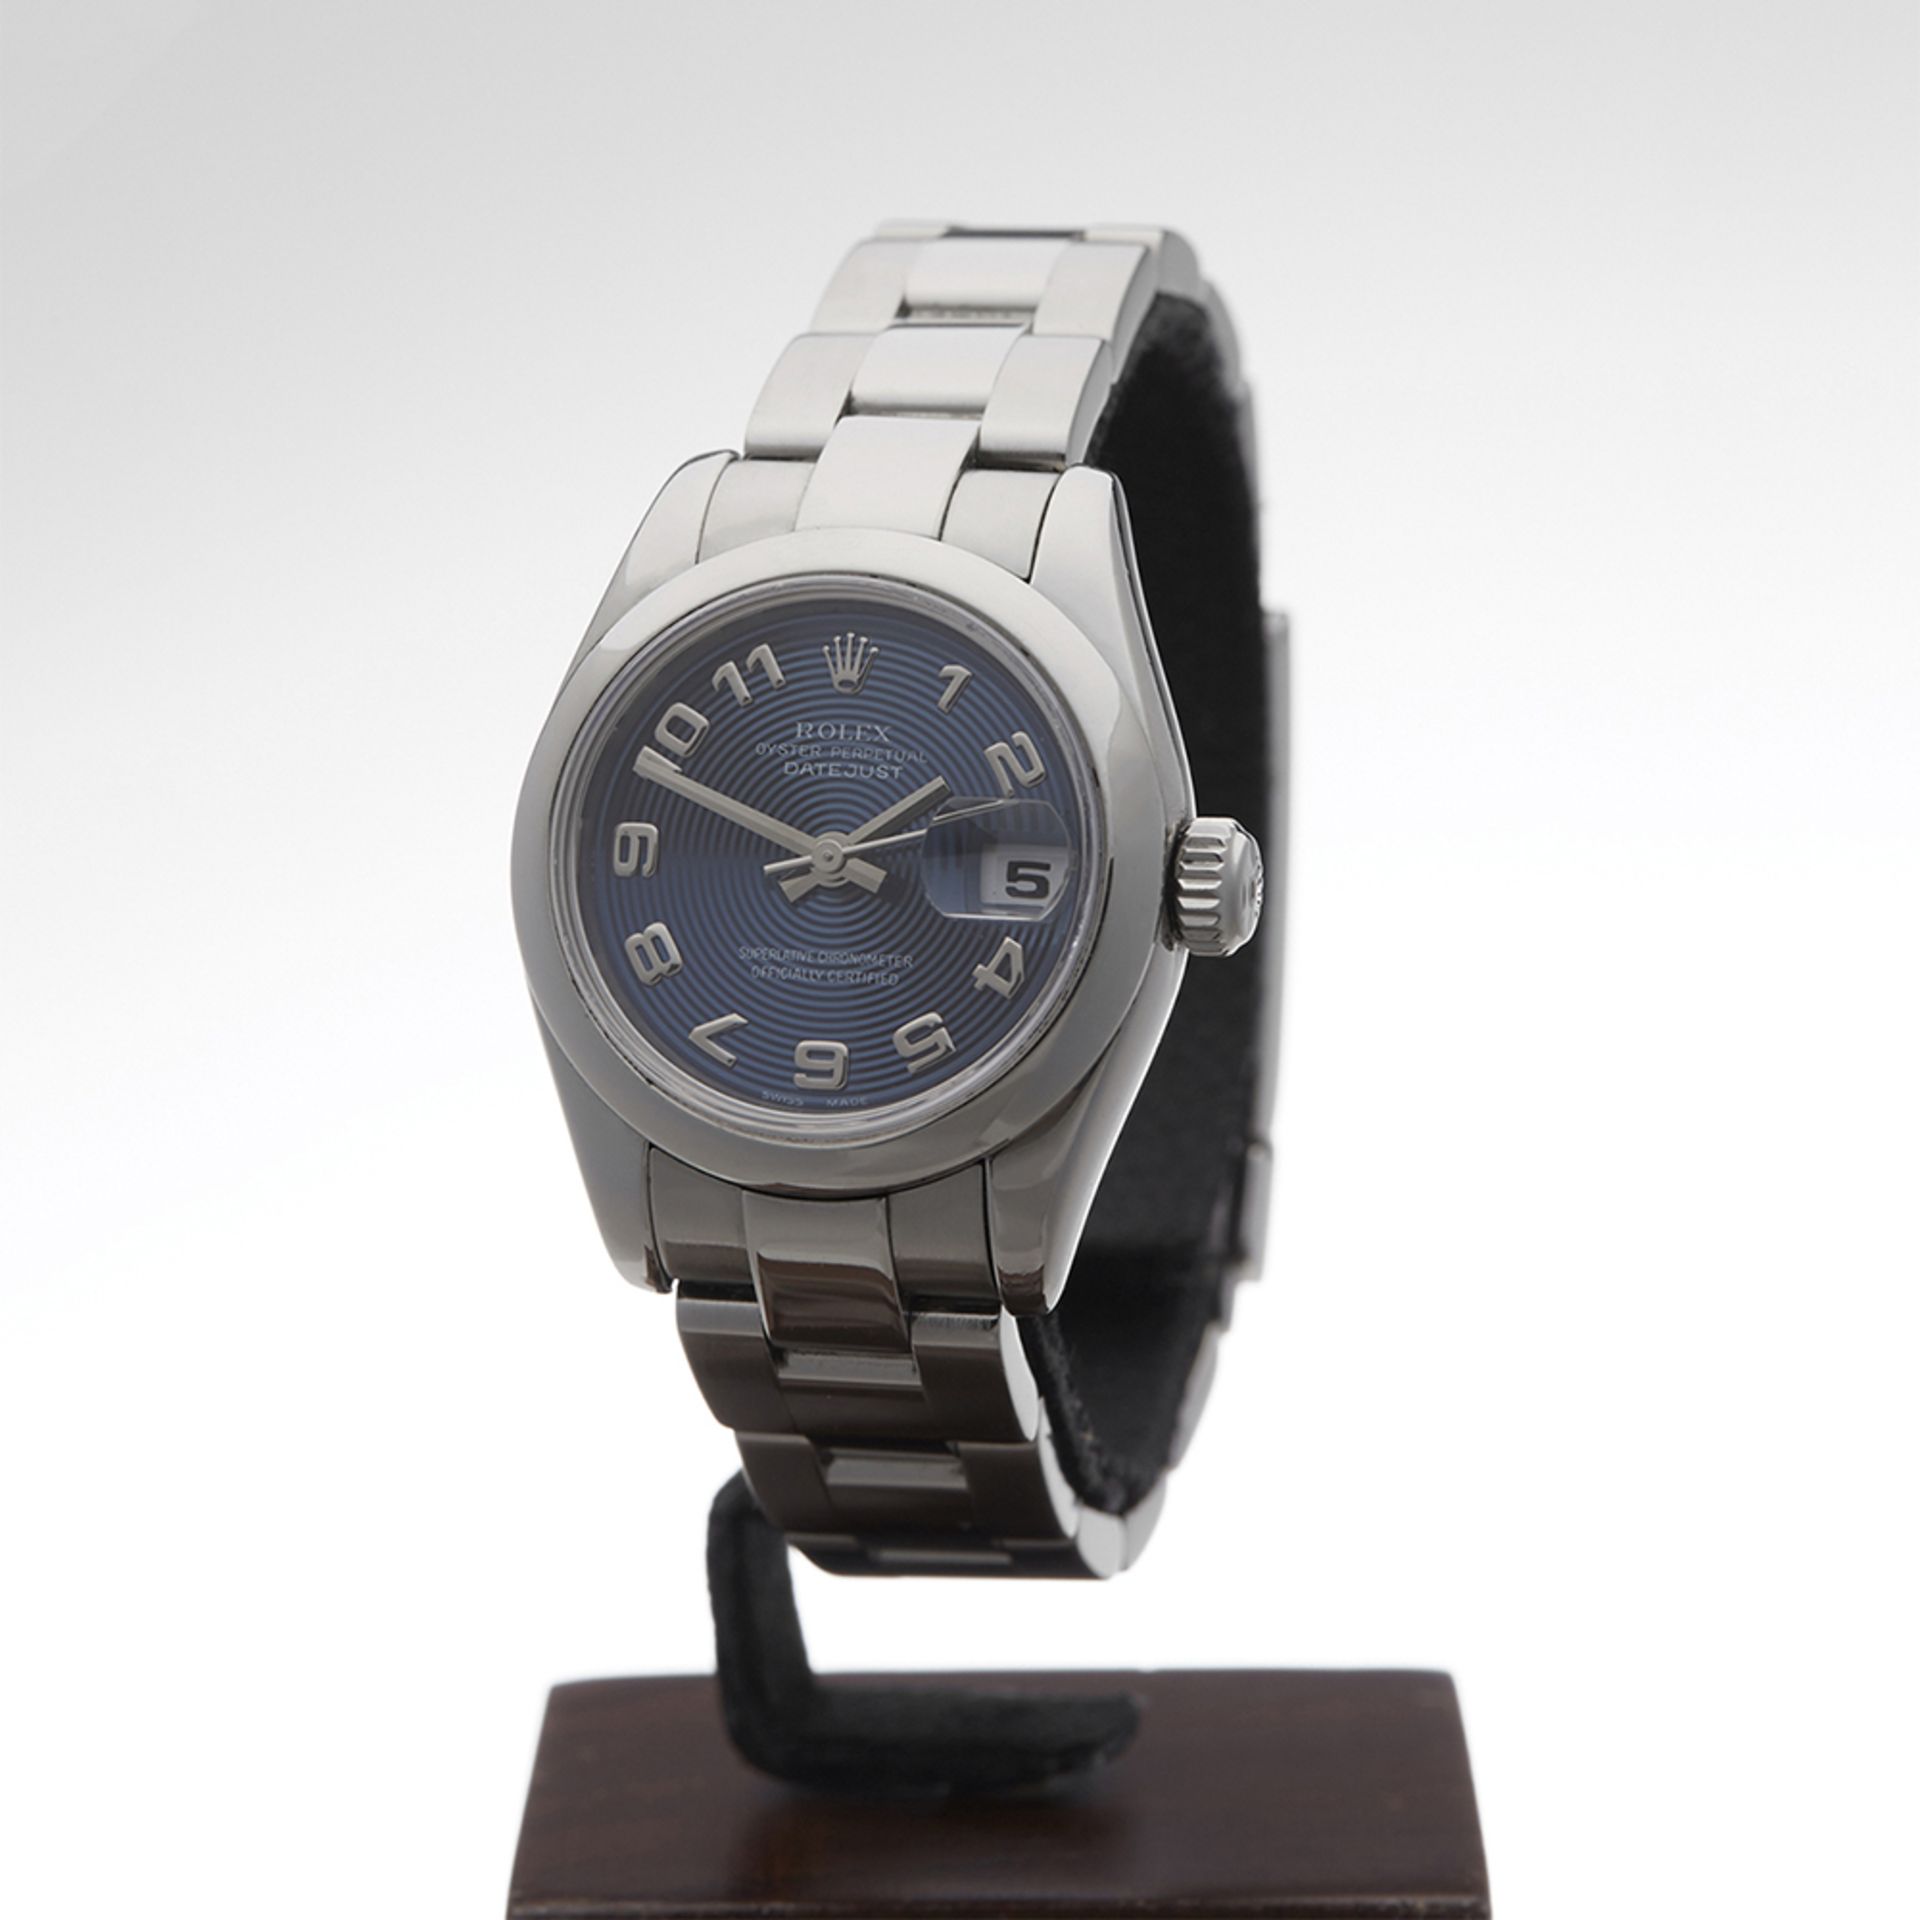 Rolex Datejust 26mm Stainless Steel - 179160 - Image 3 of 9